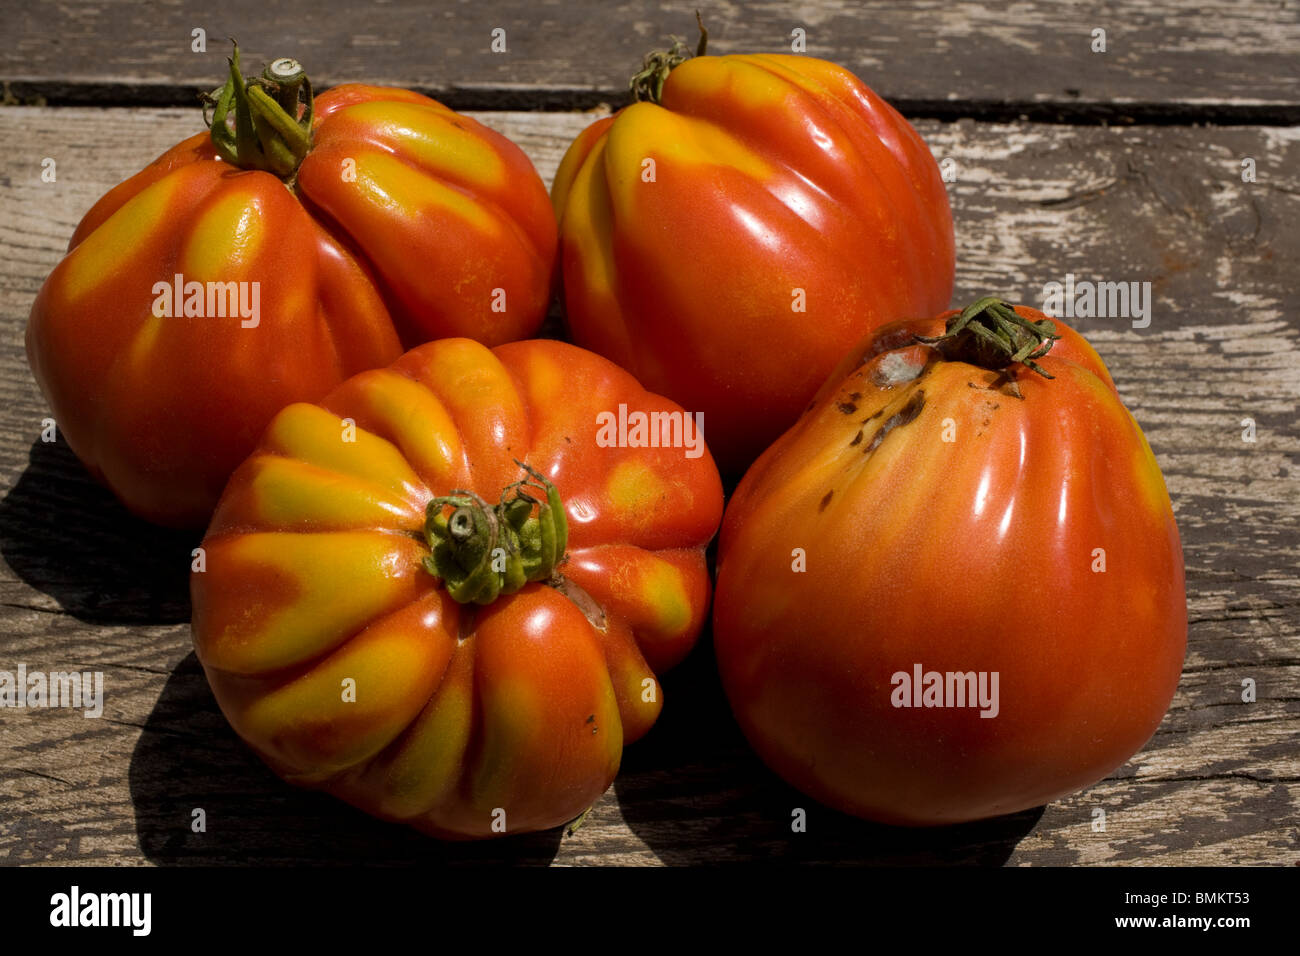 Ripe oxheart 'Coeur de Boeuf' tomatos from the Provence in the south of France. Stock Photo